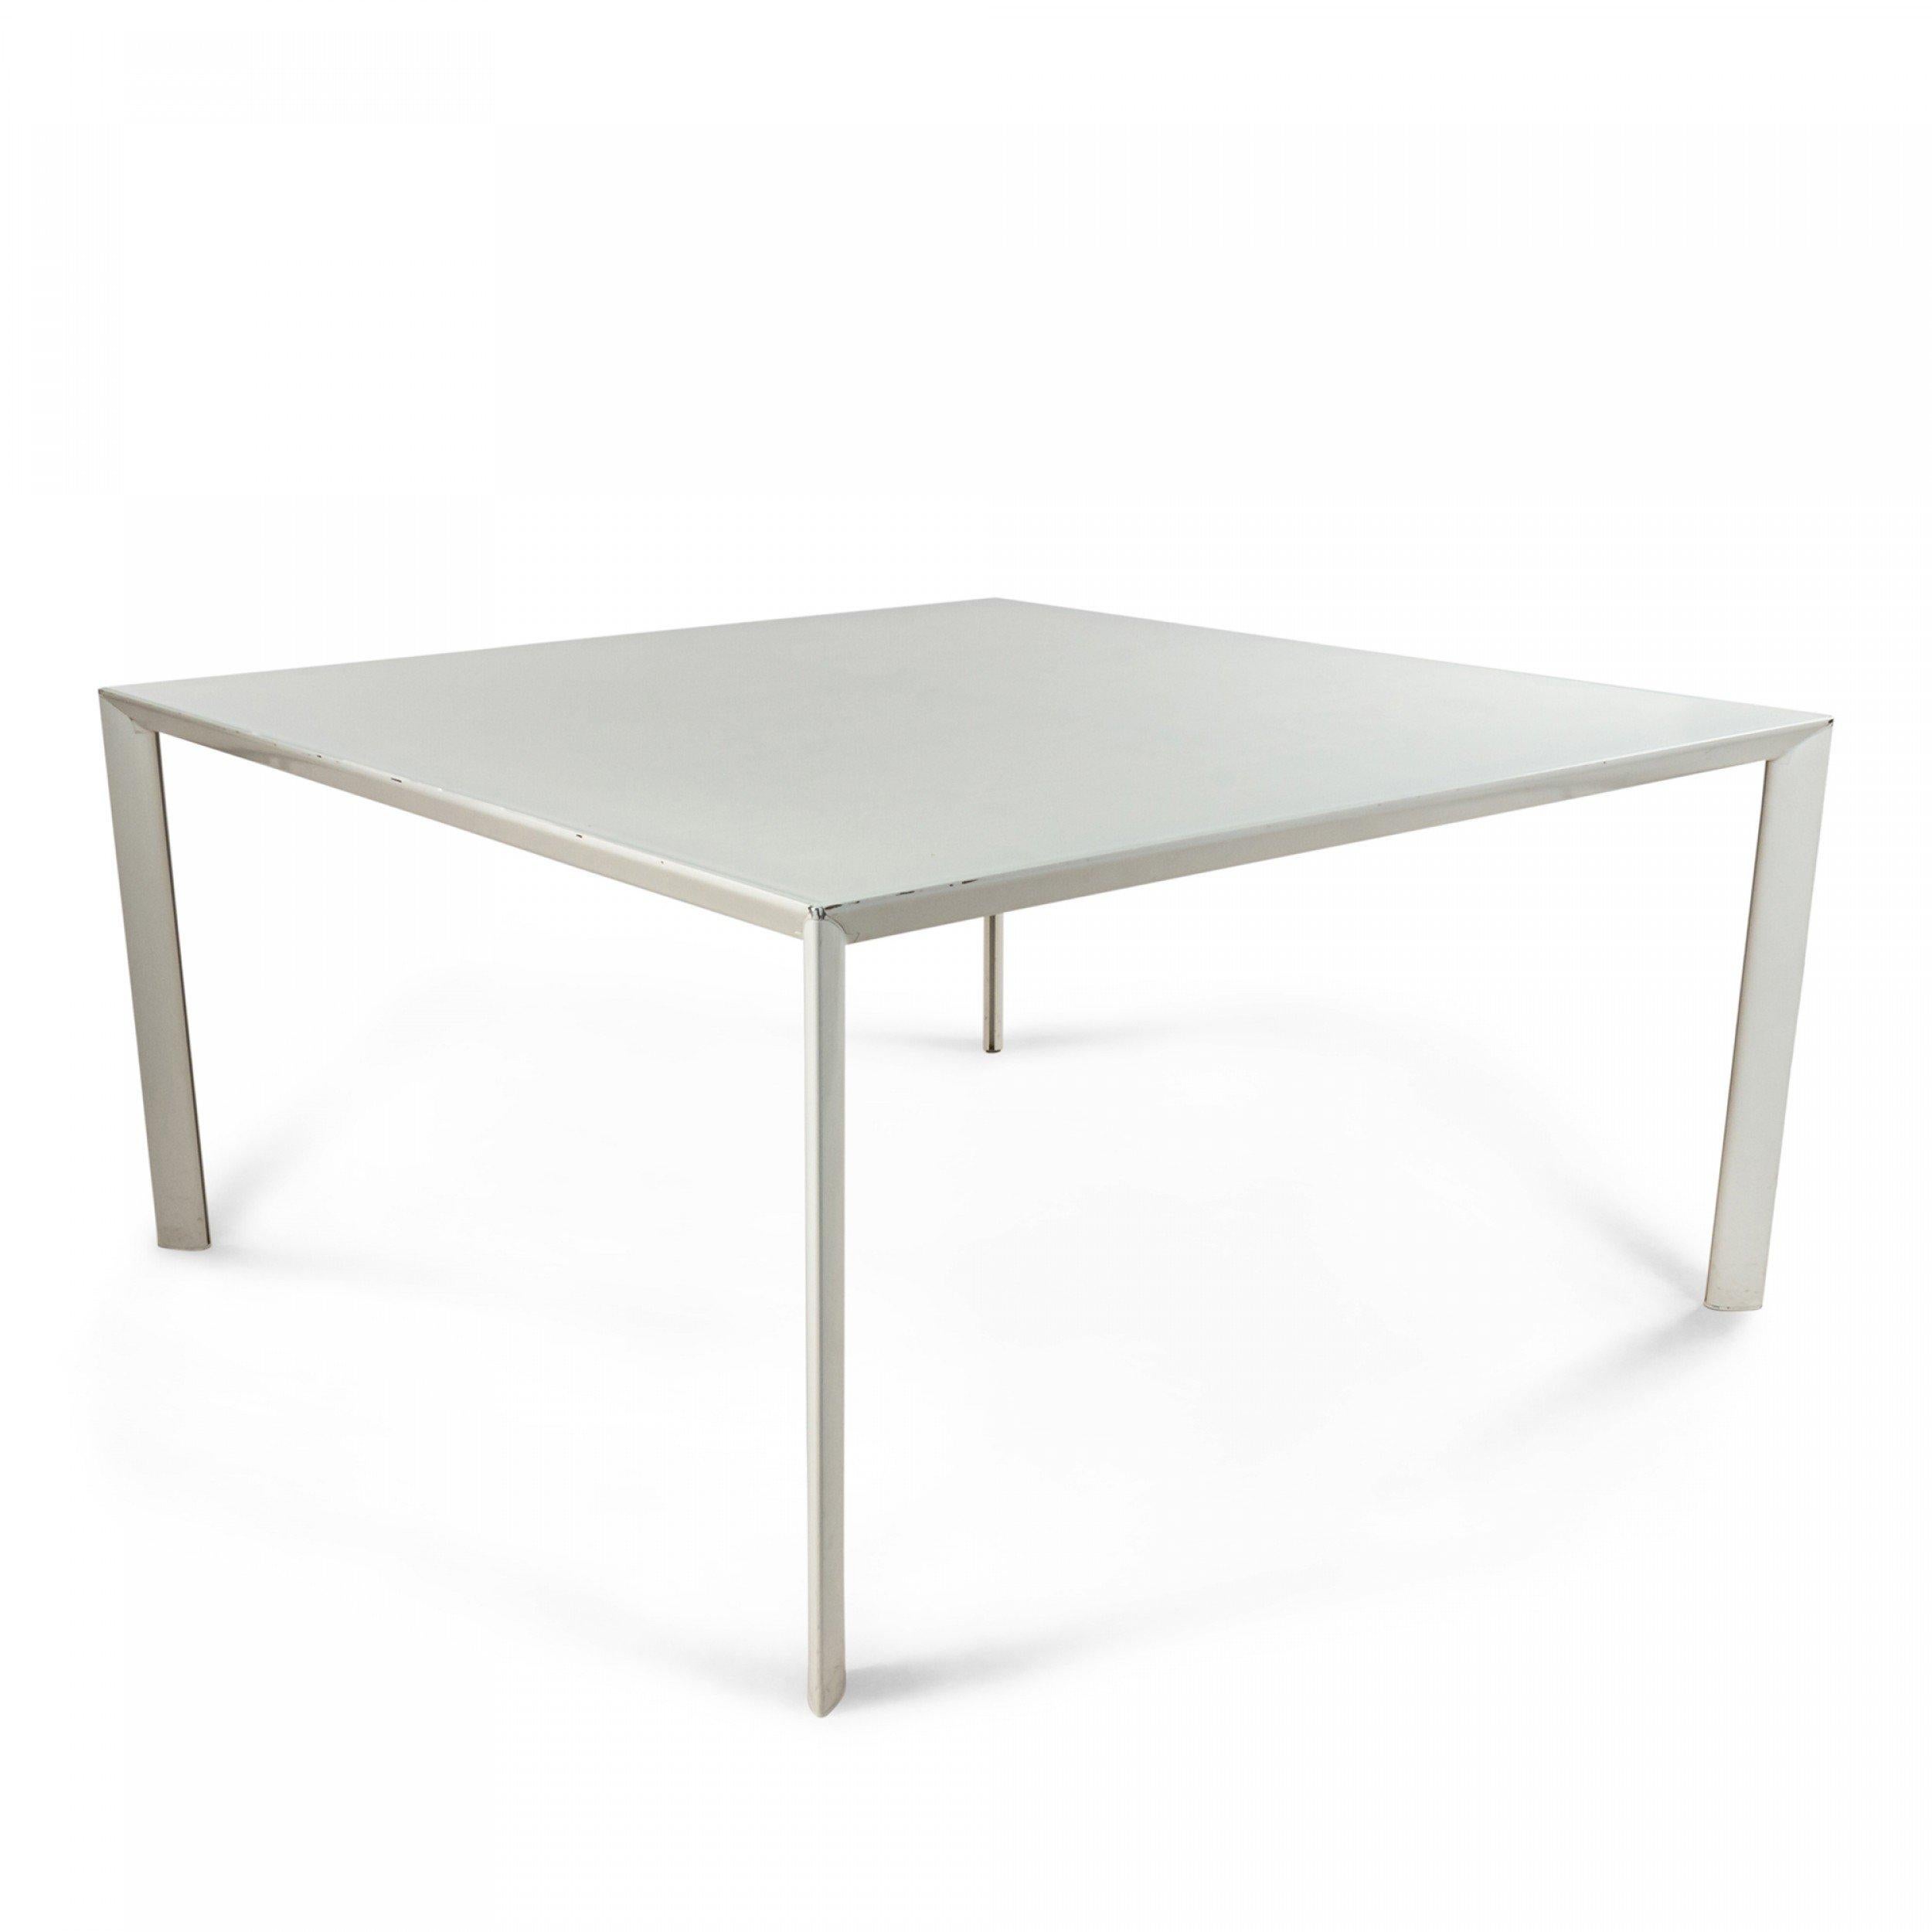 Contemporary large white Porro square work tables with white metal legs.